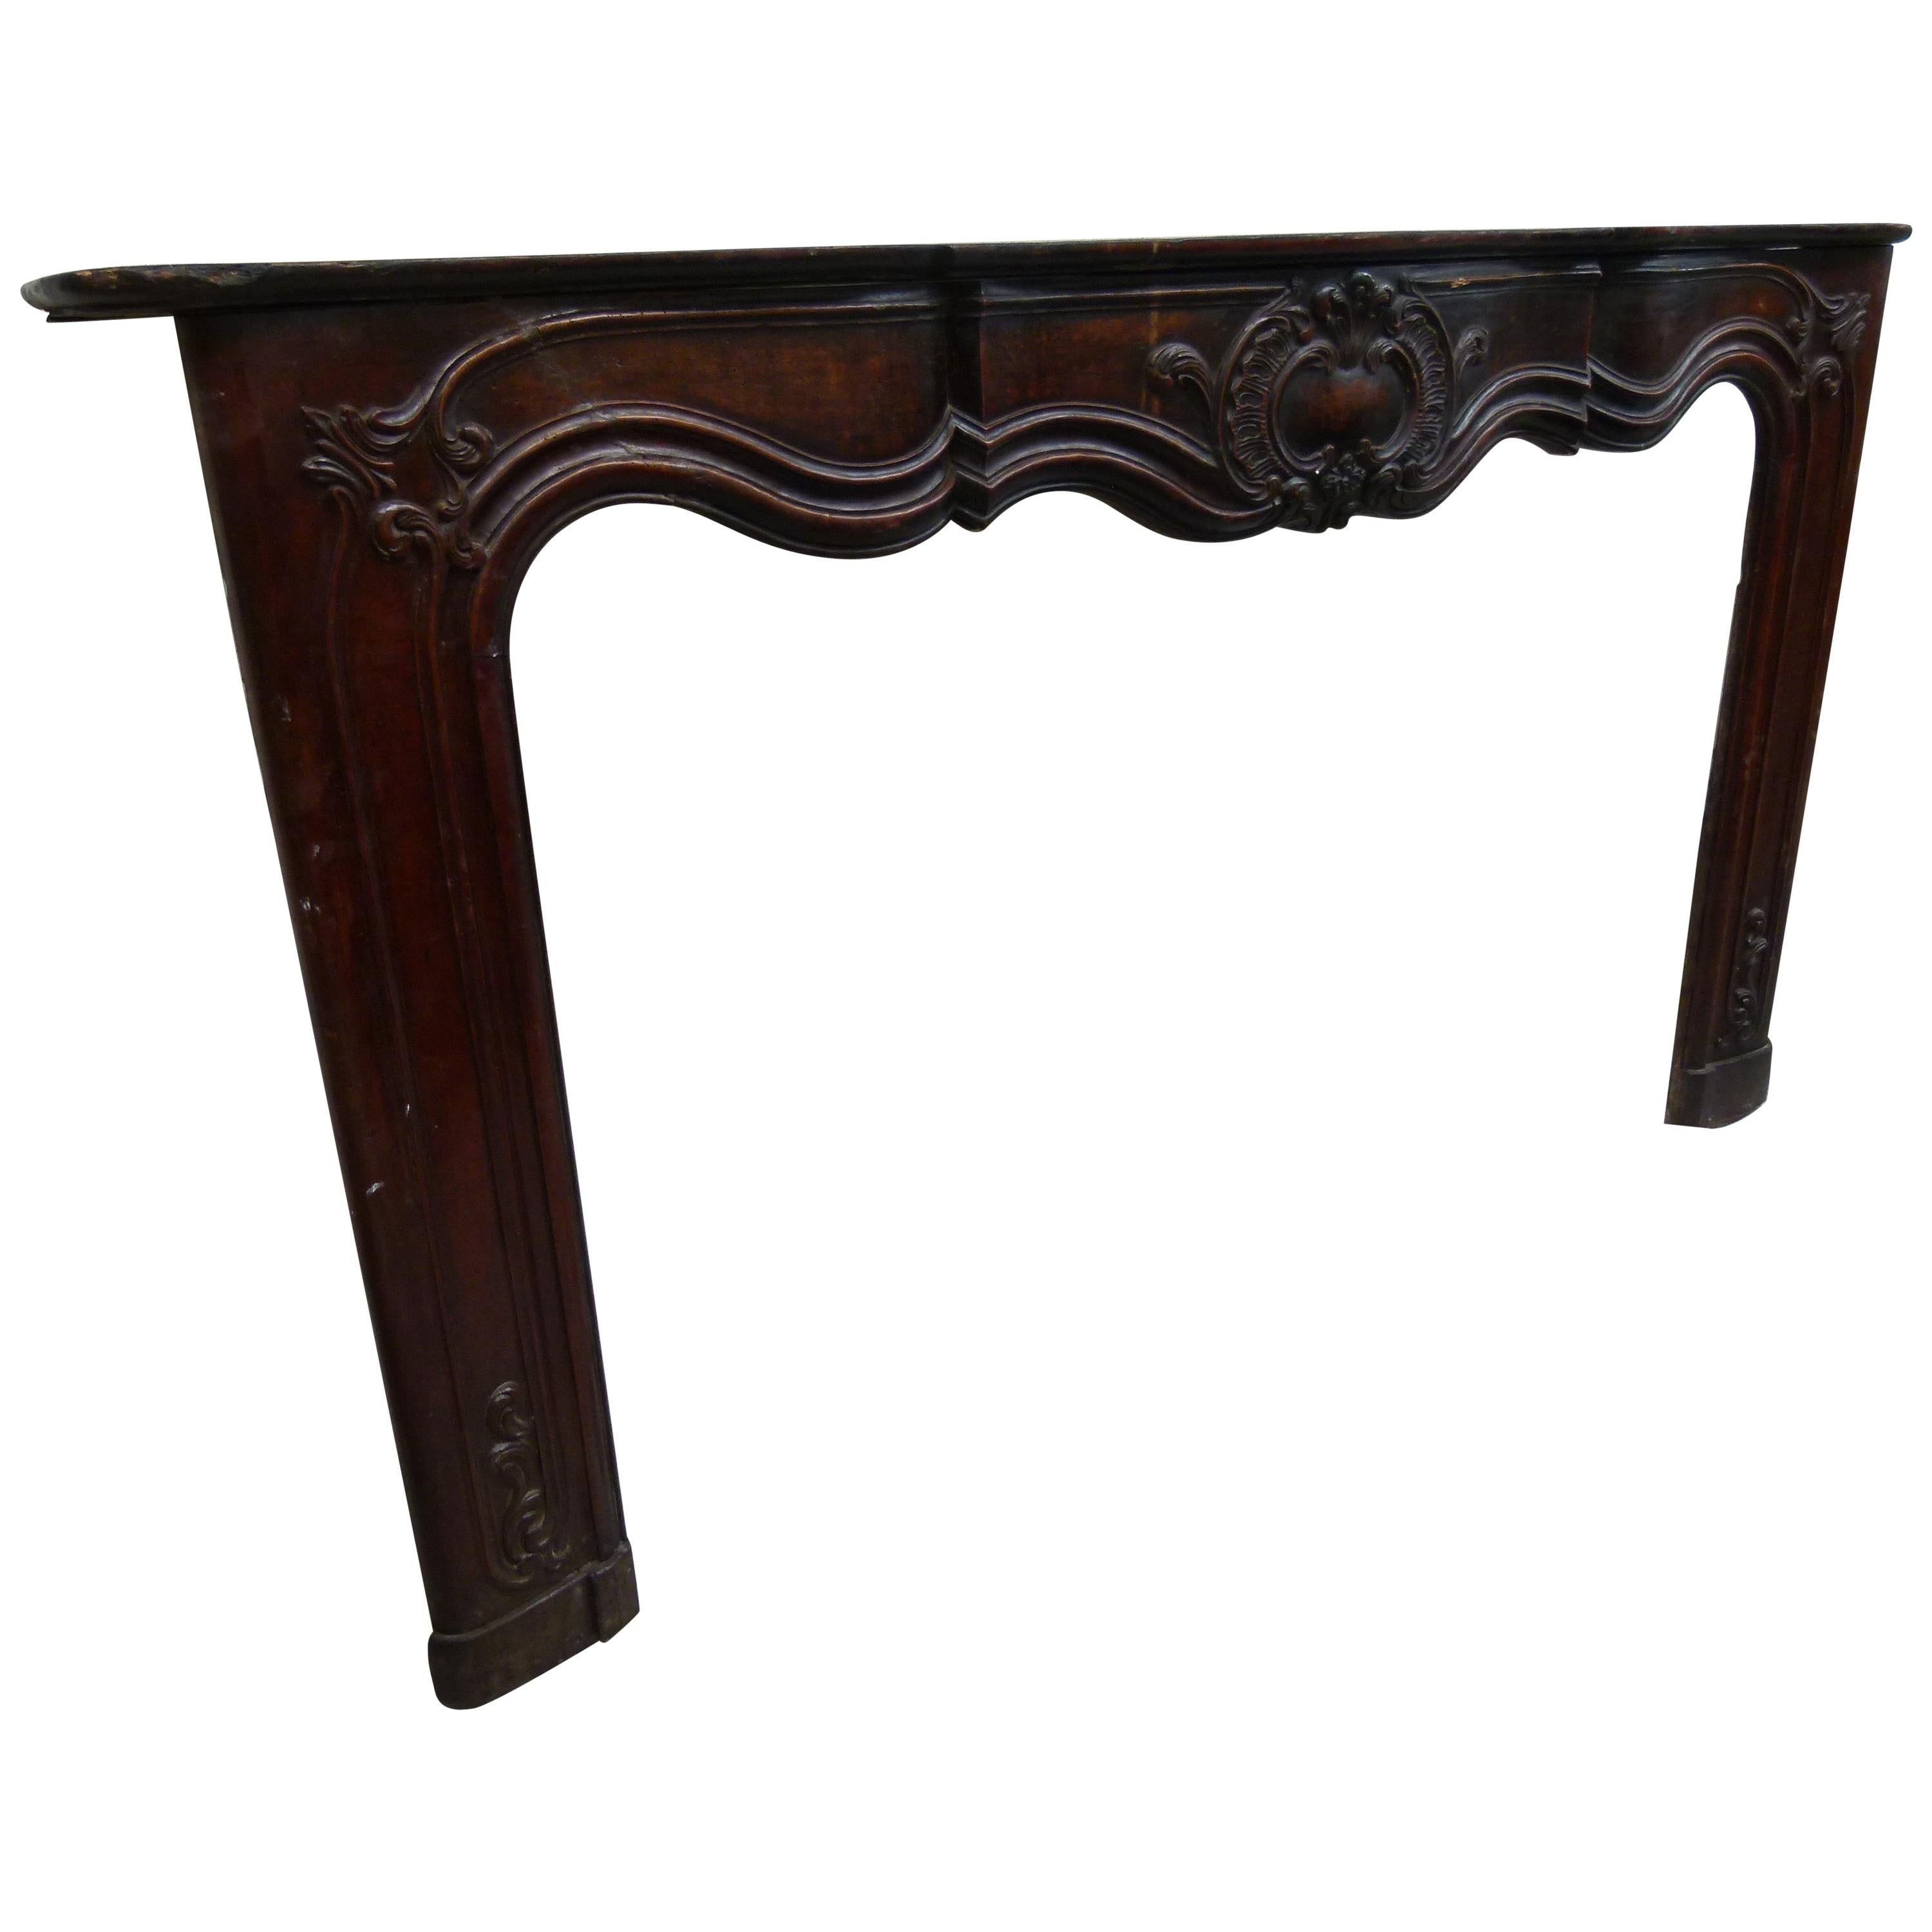 Louis XVI Style Wooden Carved Fireplace Mantel For Sale